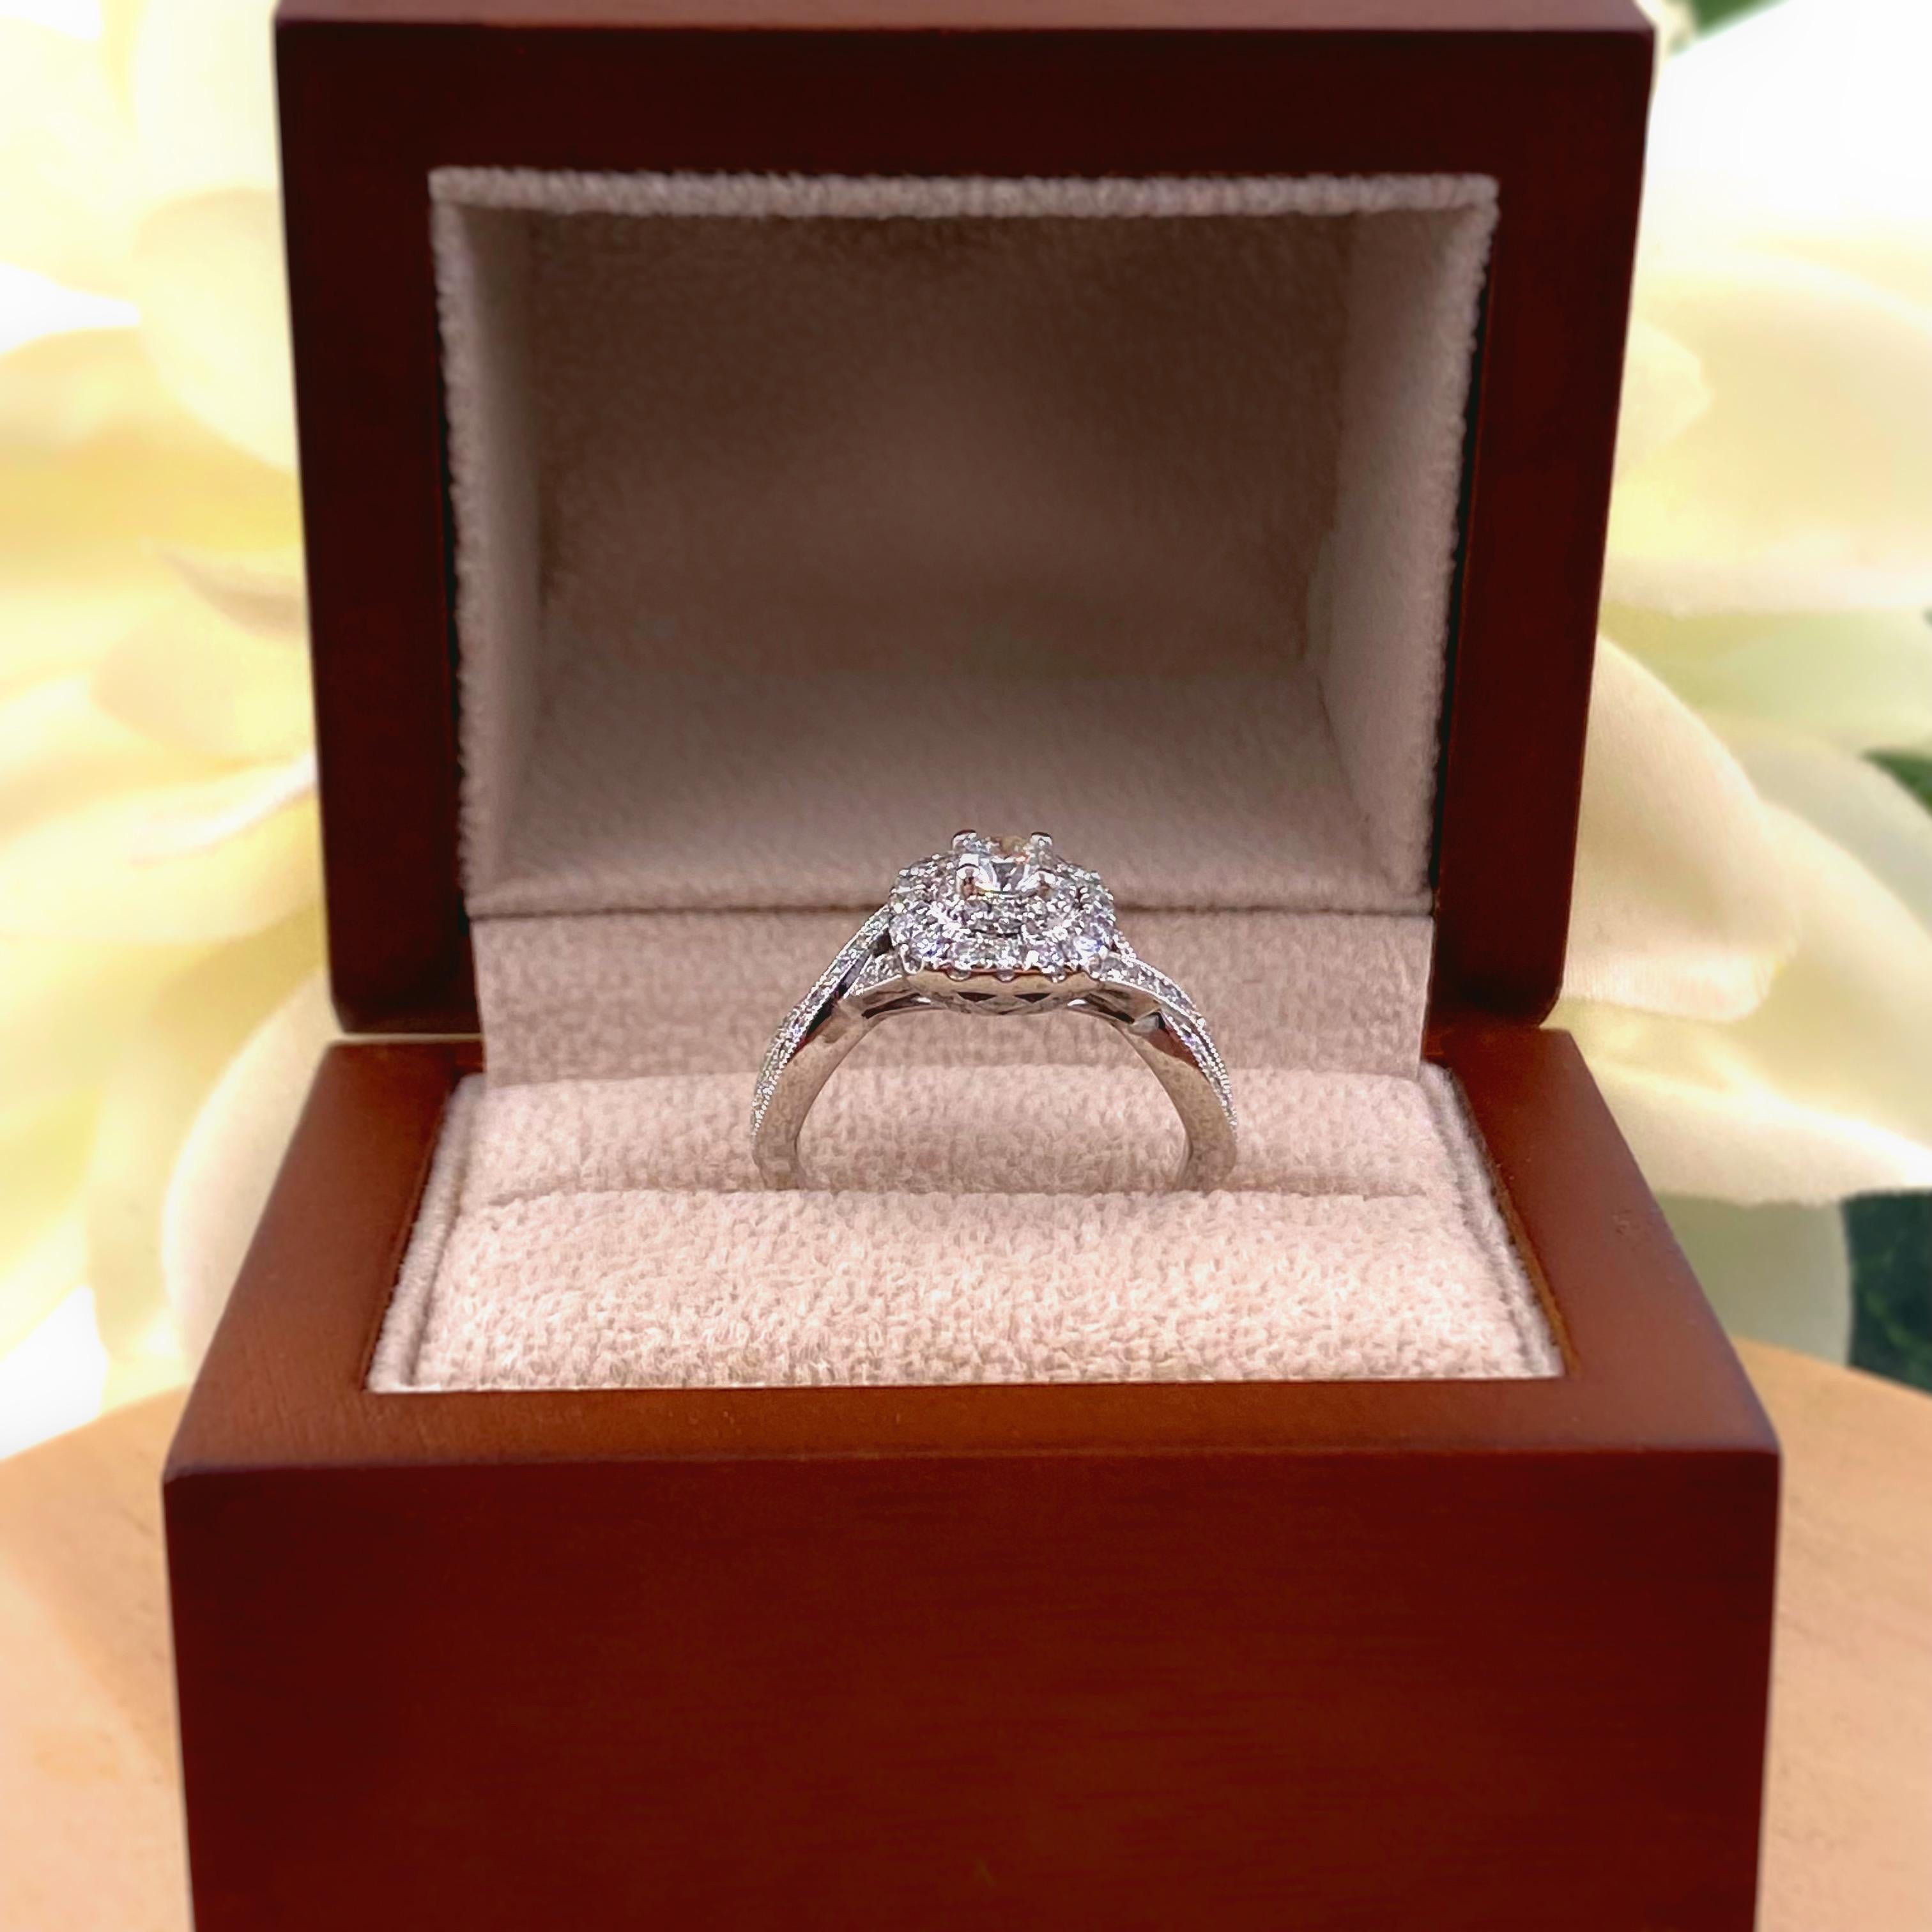 Neil Lane Round Diamond Engagement Ring Twisted Band 7/8 Tcw 14k WG In Excellent Condition For Sale In San Diego, CA